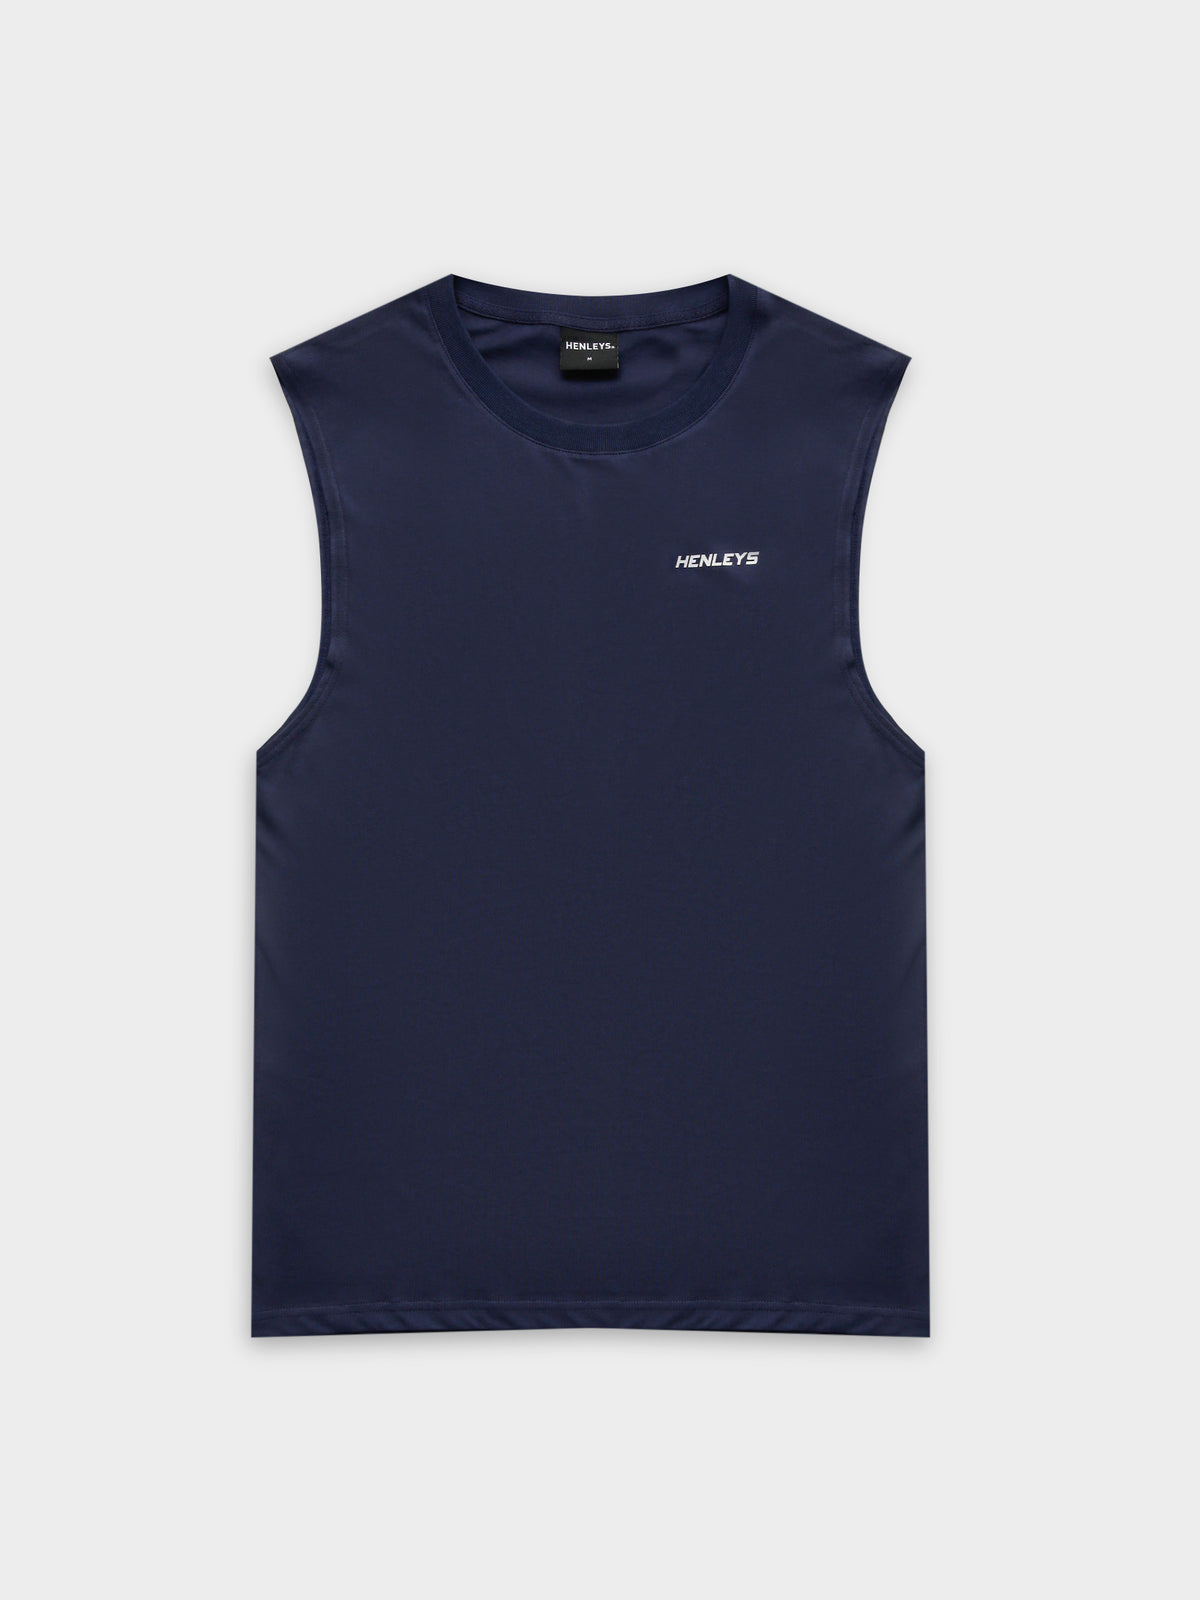 Vice Muscle in Navy